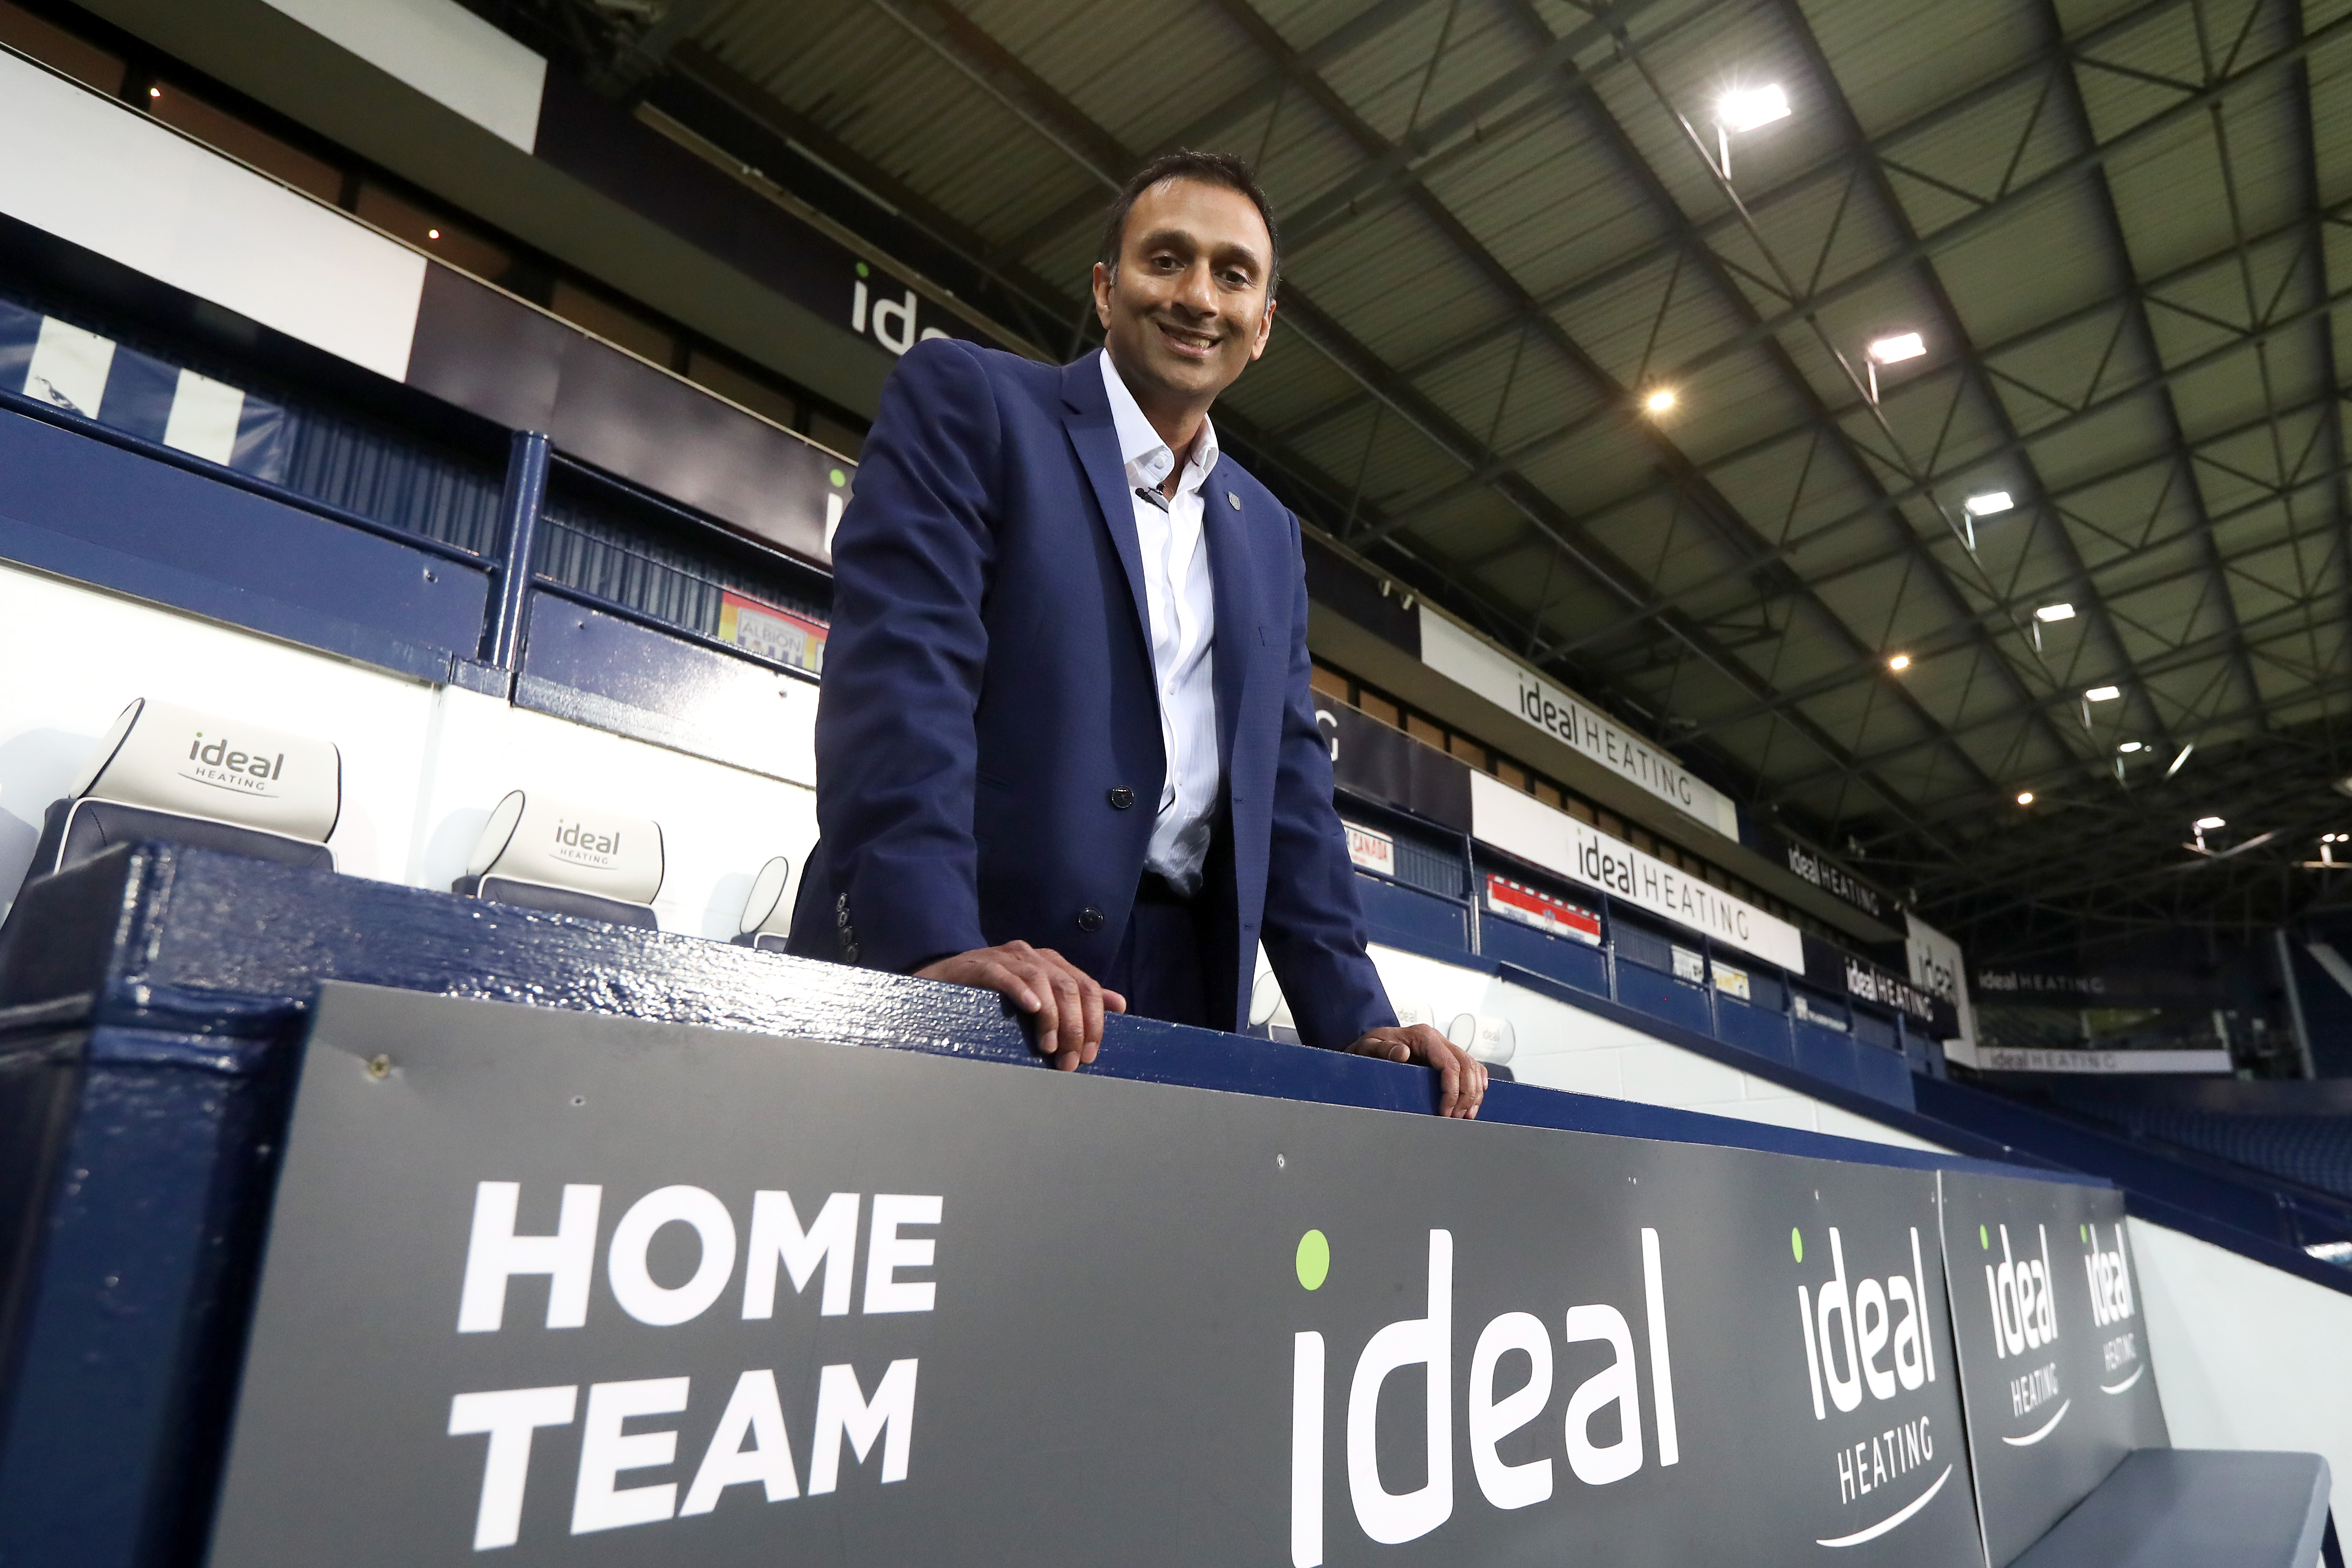 Shilen Patel stood in the home dugout at The Hawthorns in a suit smiling at the camera